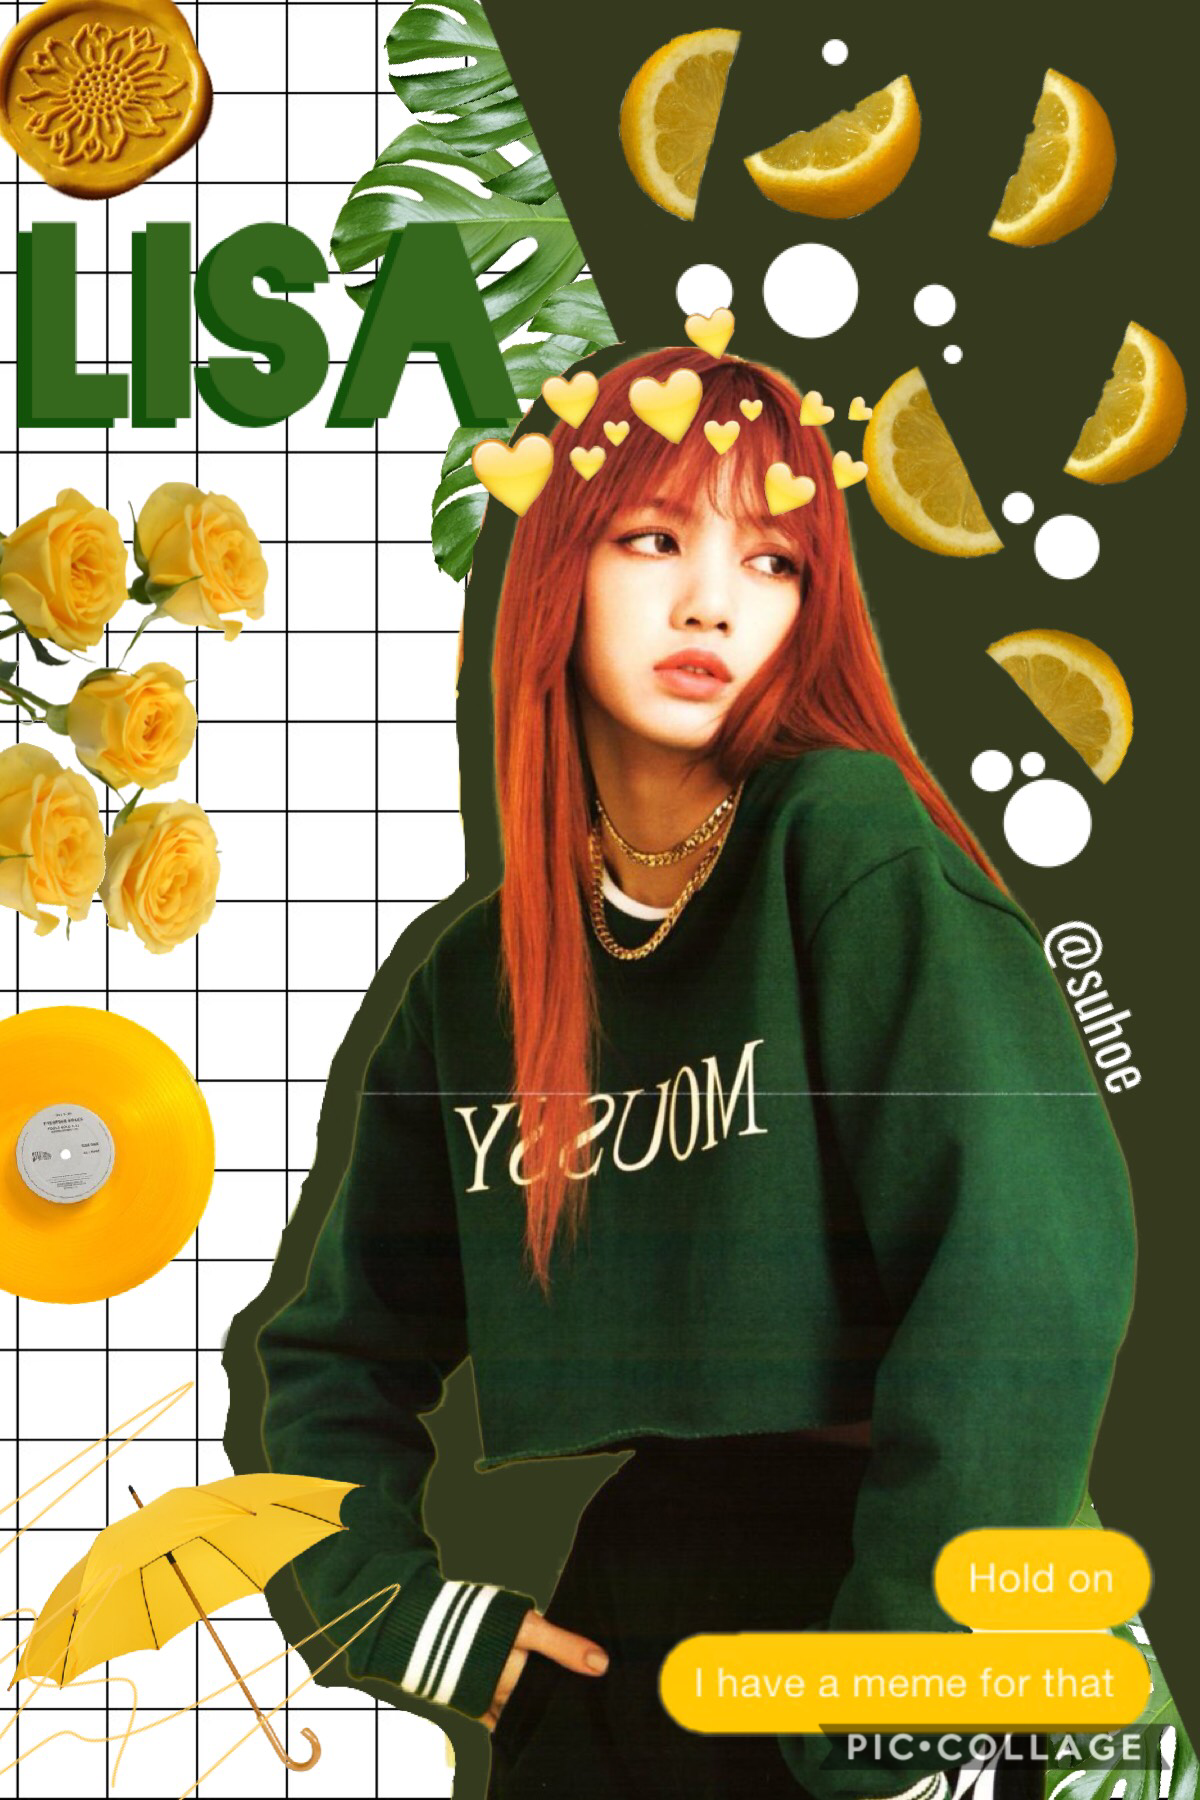 💛🍋lisa🍋💛 tap
it’s 7 a.m and i’m posting edits lol

i’ll be posting edits that i made yesterday

i’m bored